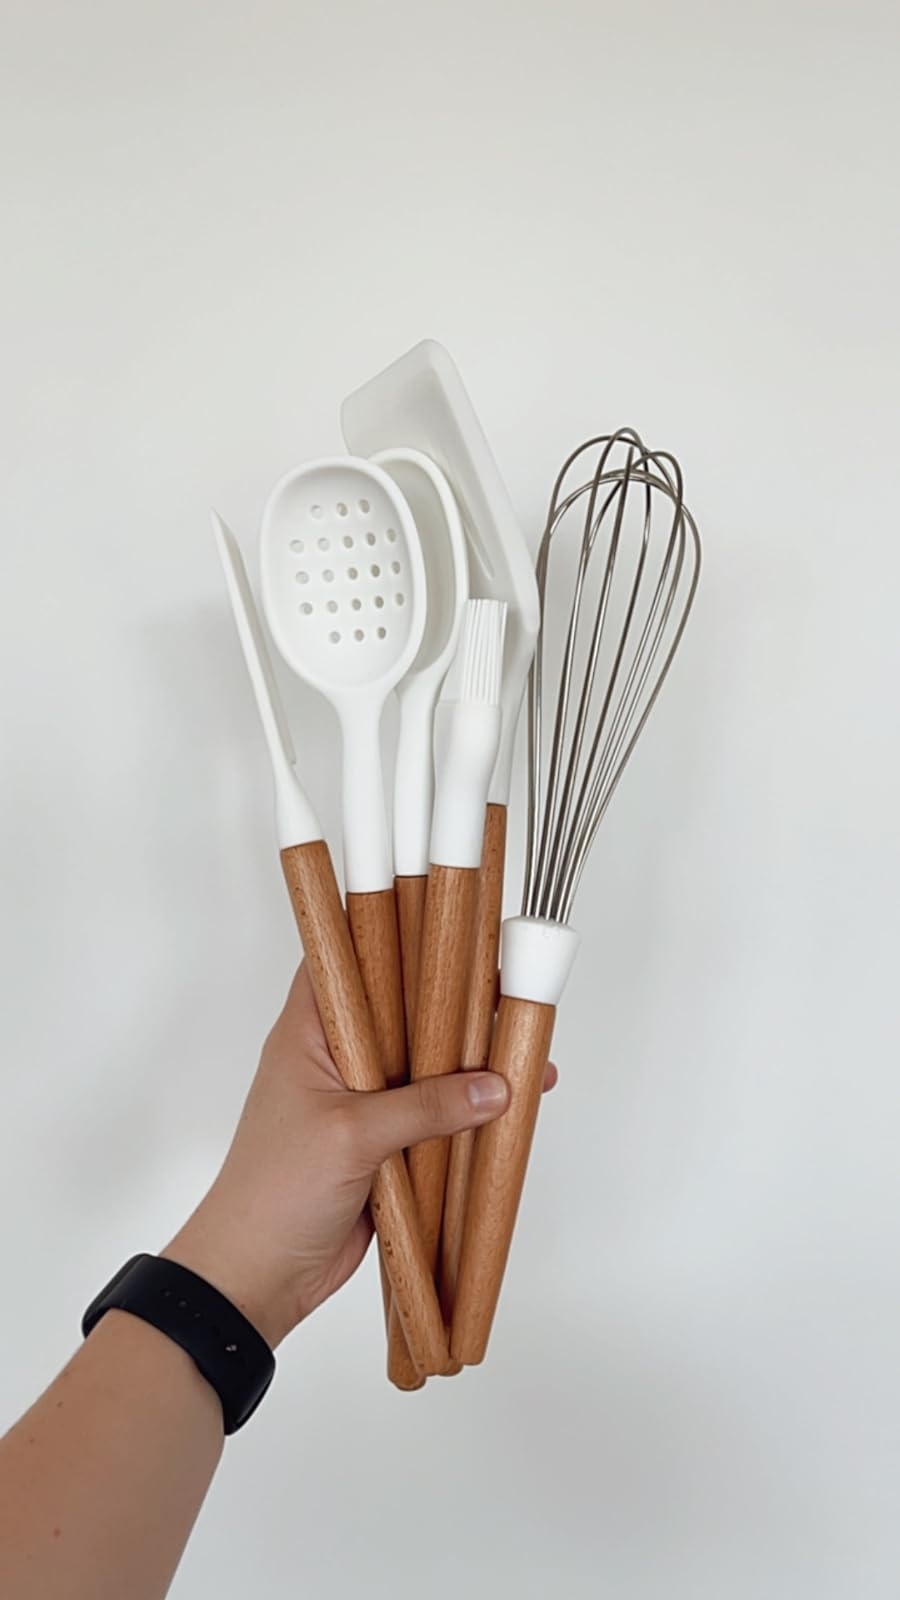 Hand holding wooden-handled kitchen utensils including a spatula, spoon, and whisk